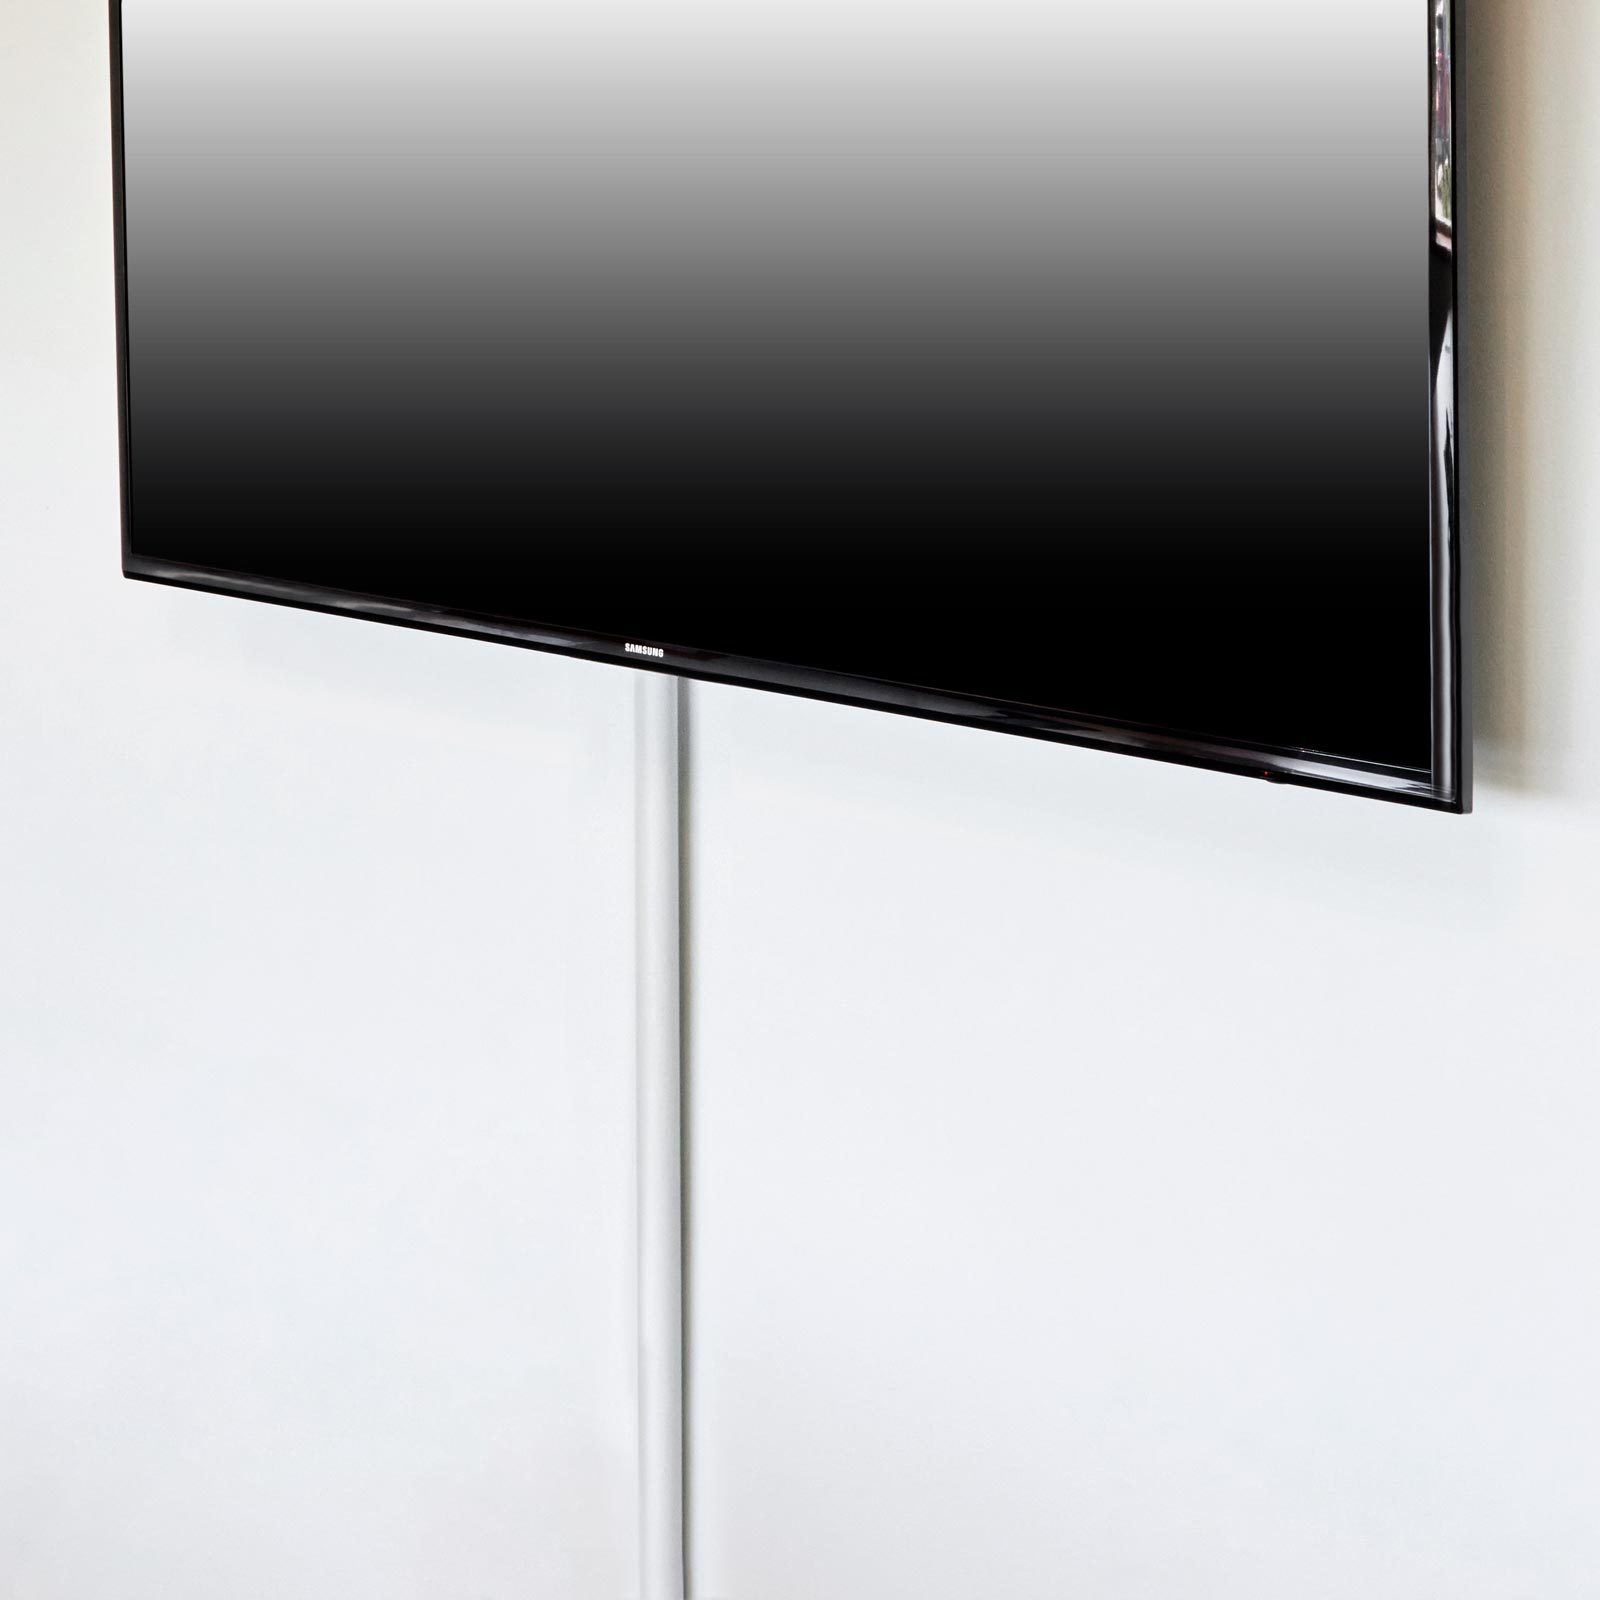 using a curtain rod to hide wires for a wall mounted flat screen TV